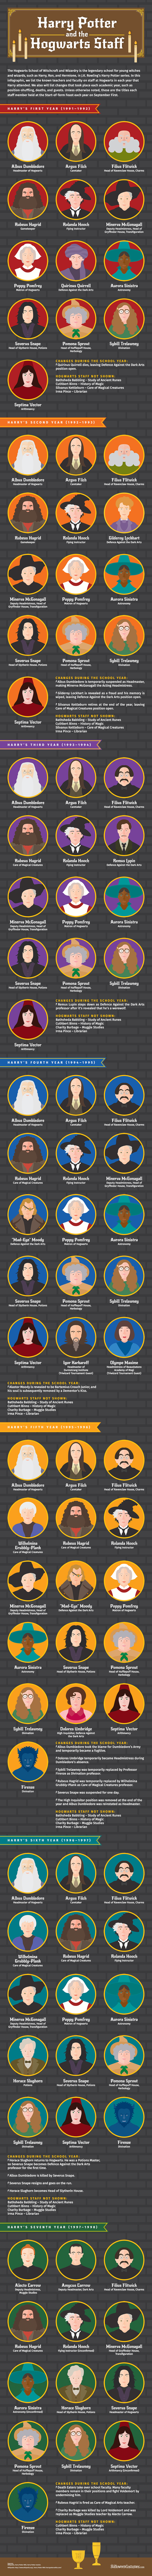 Harry Potter and the Hogwarts Staff [Infographic] -   Blog